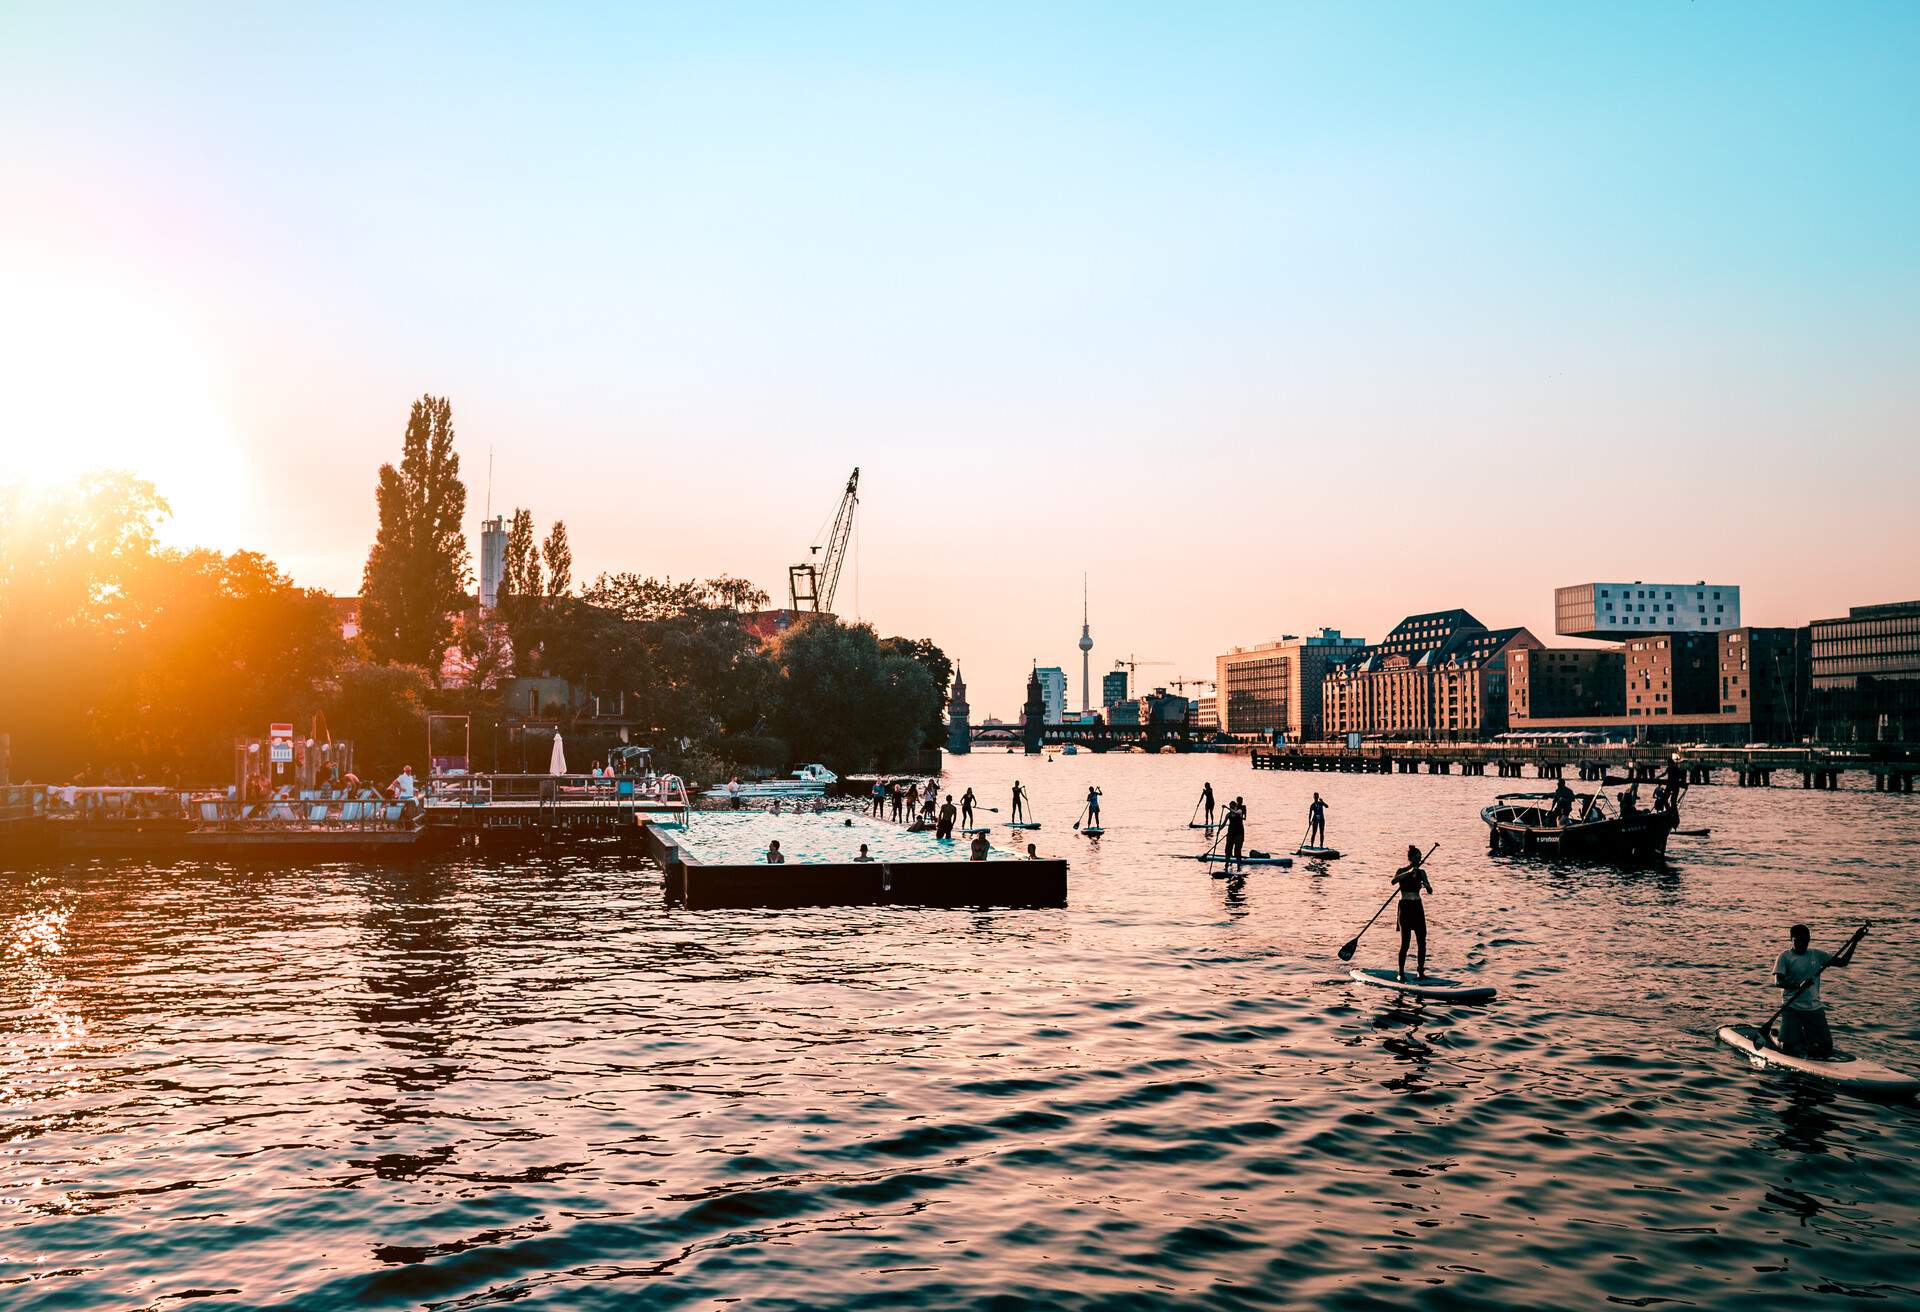 DEST_GERMANY_BERLIN_MITTE_SPREE-RIVER_THEME_PEOPLE_PADDLEBOARDING_SWIMMING_SUNSET_SUMMER-GettyImages-713869815